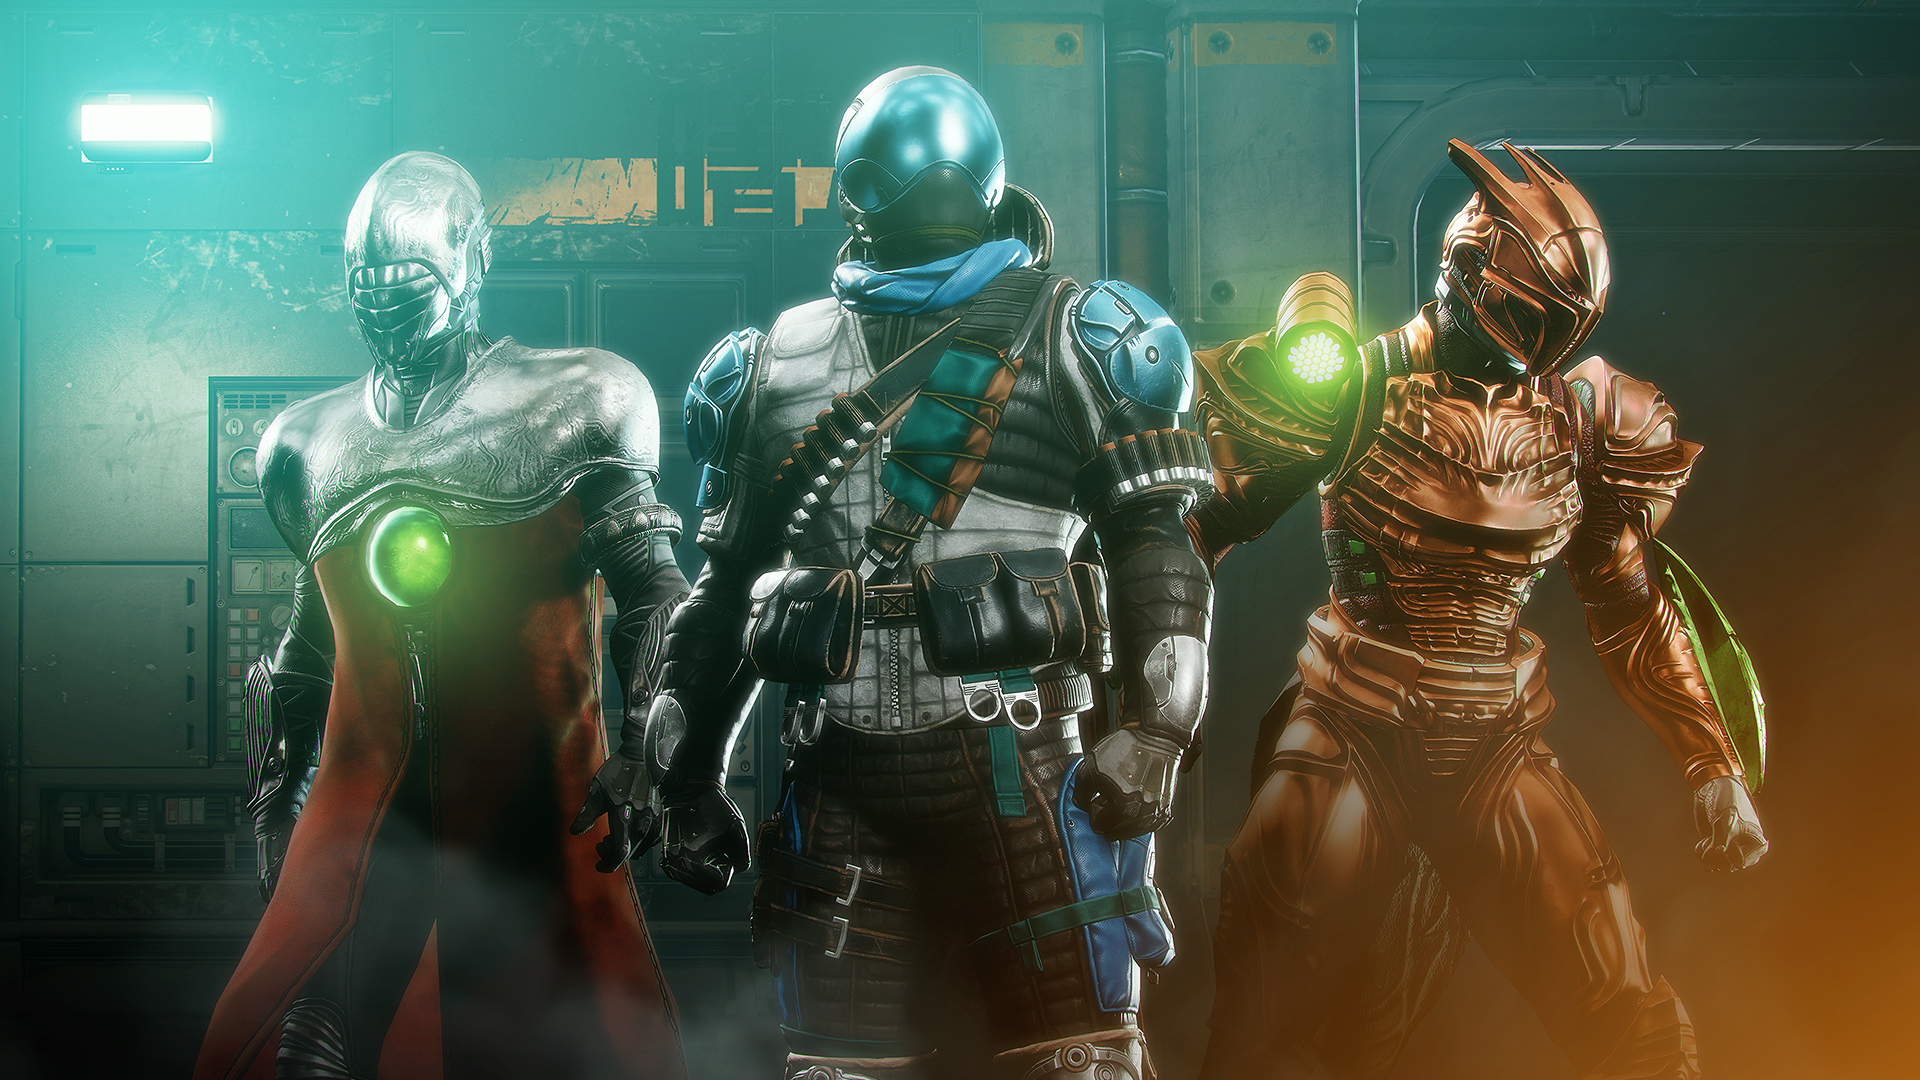 Bungie confirms multiple unannounced projects as part of Sony deal